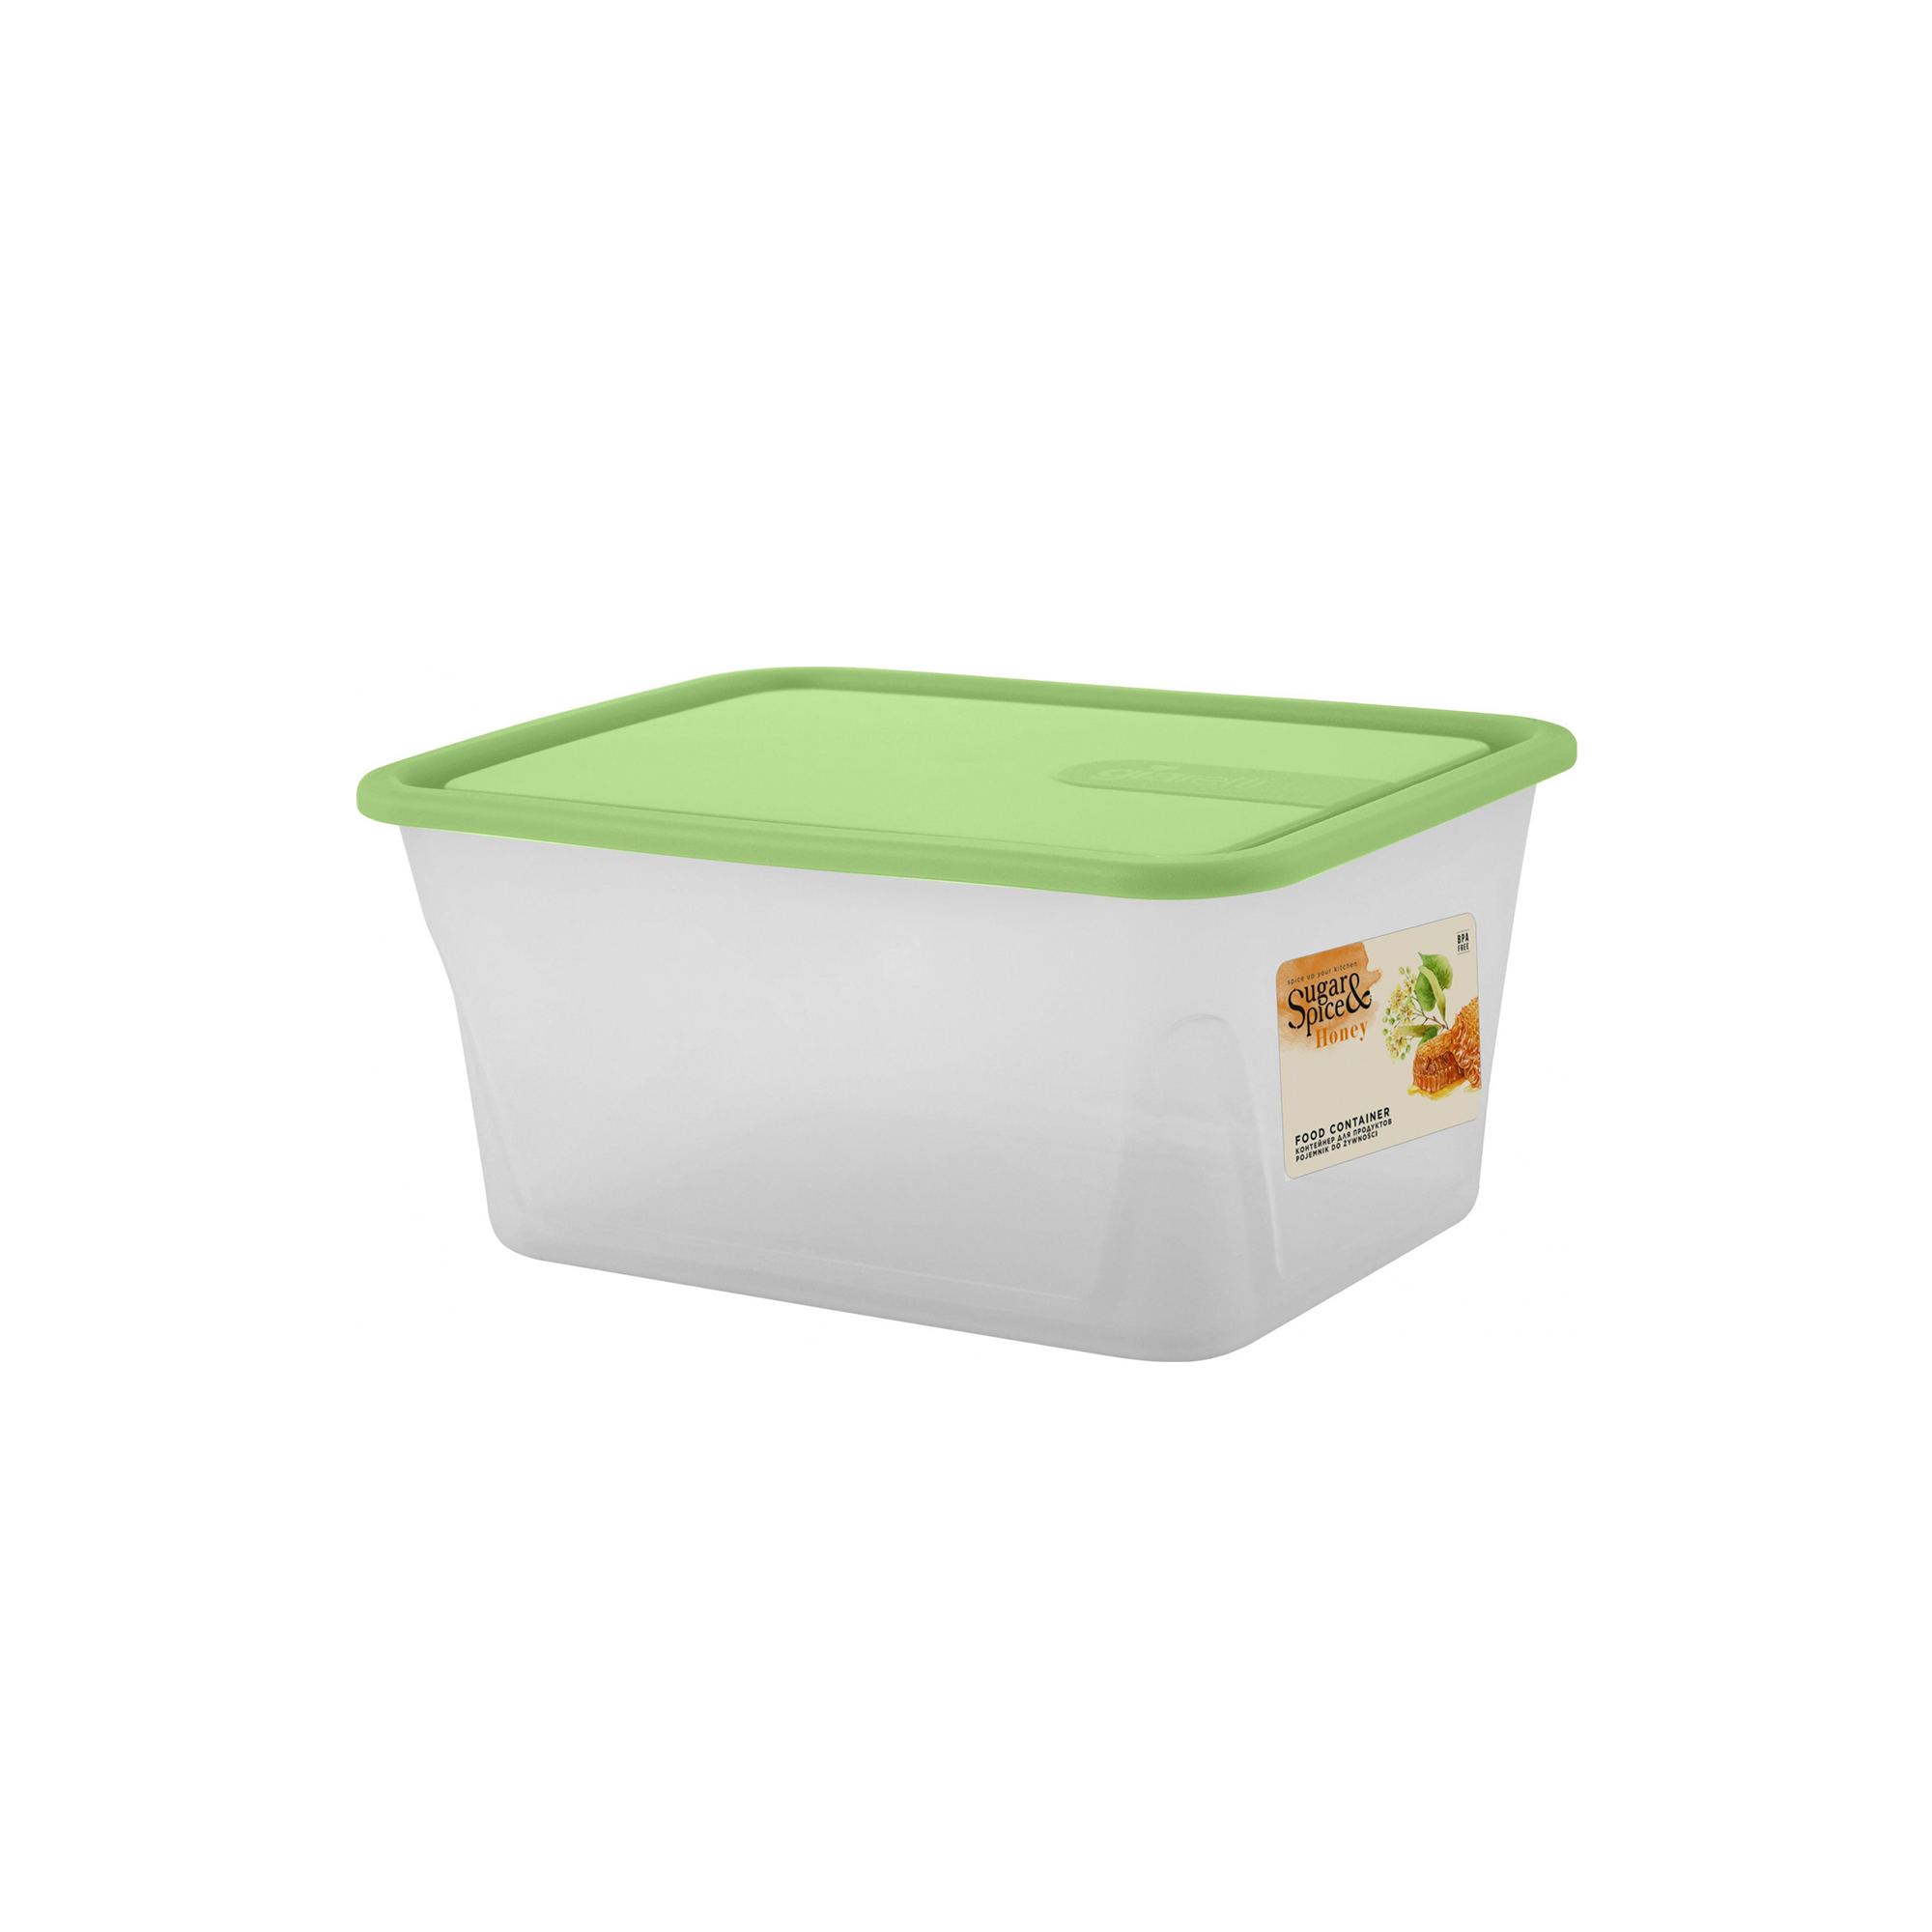 Food container SE1103 